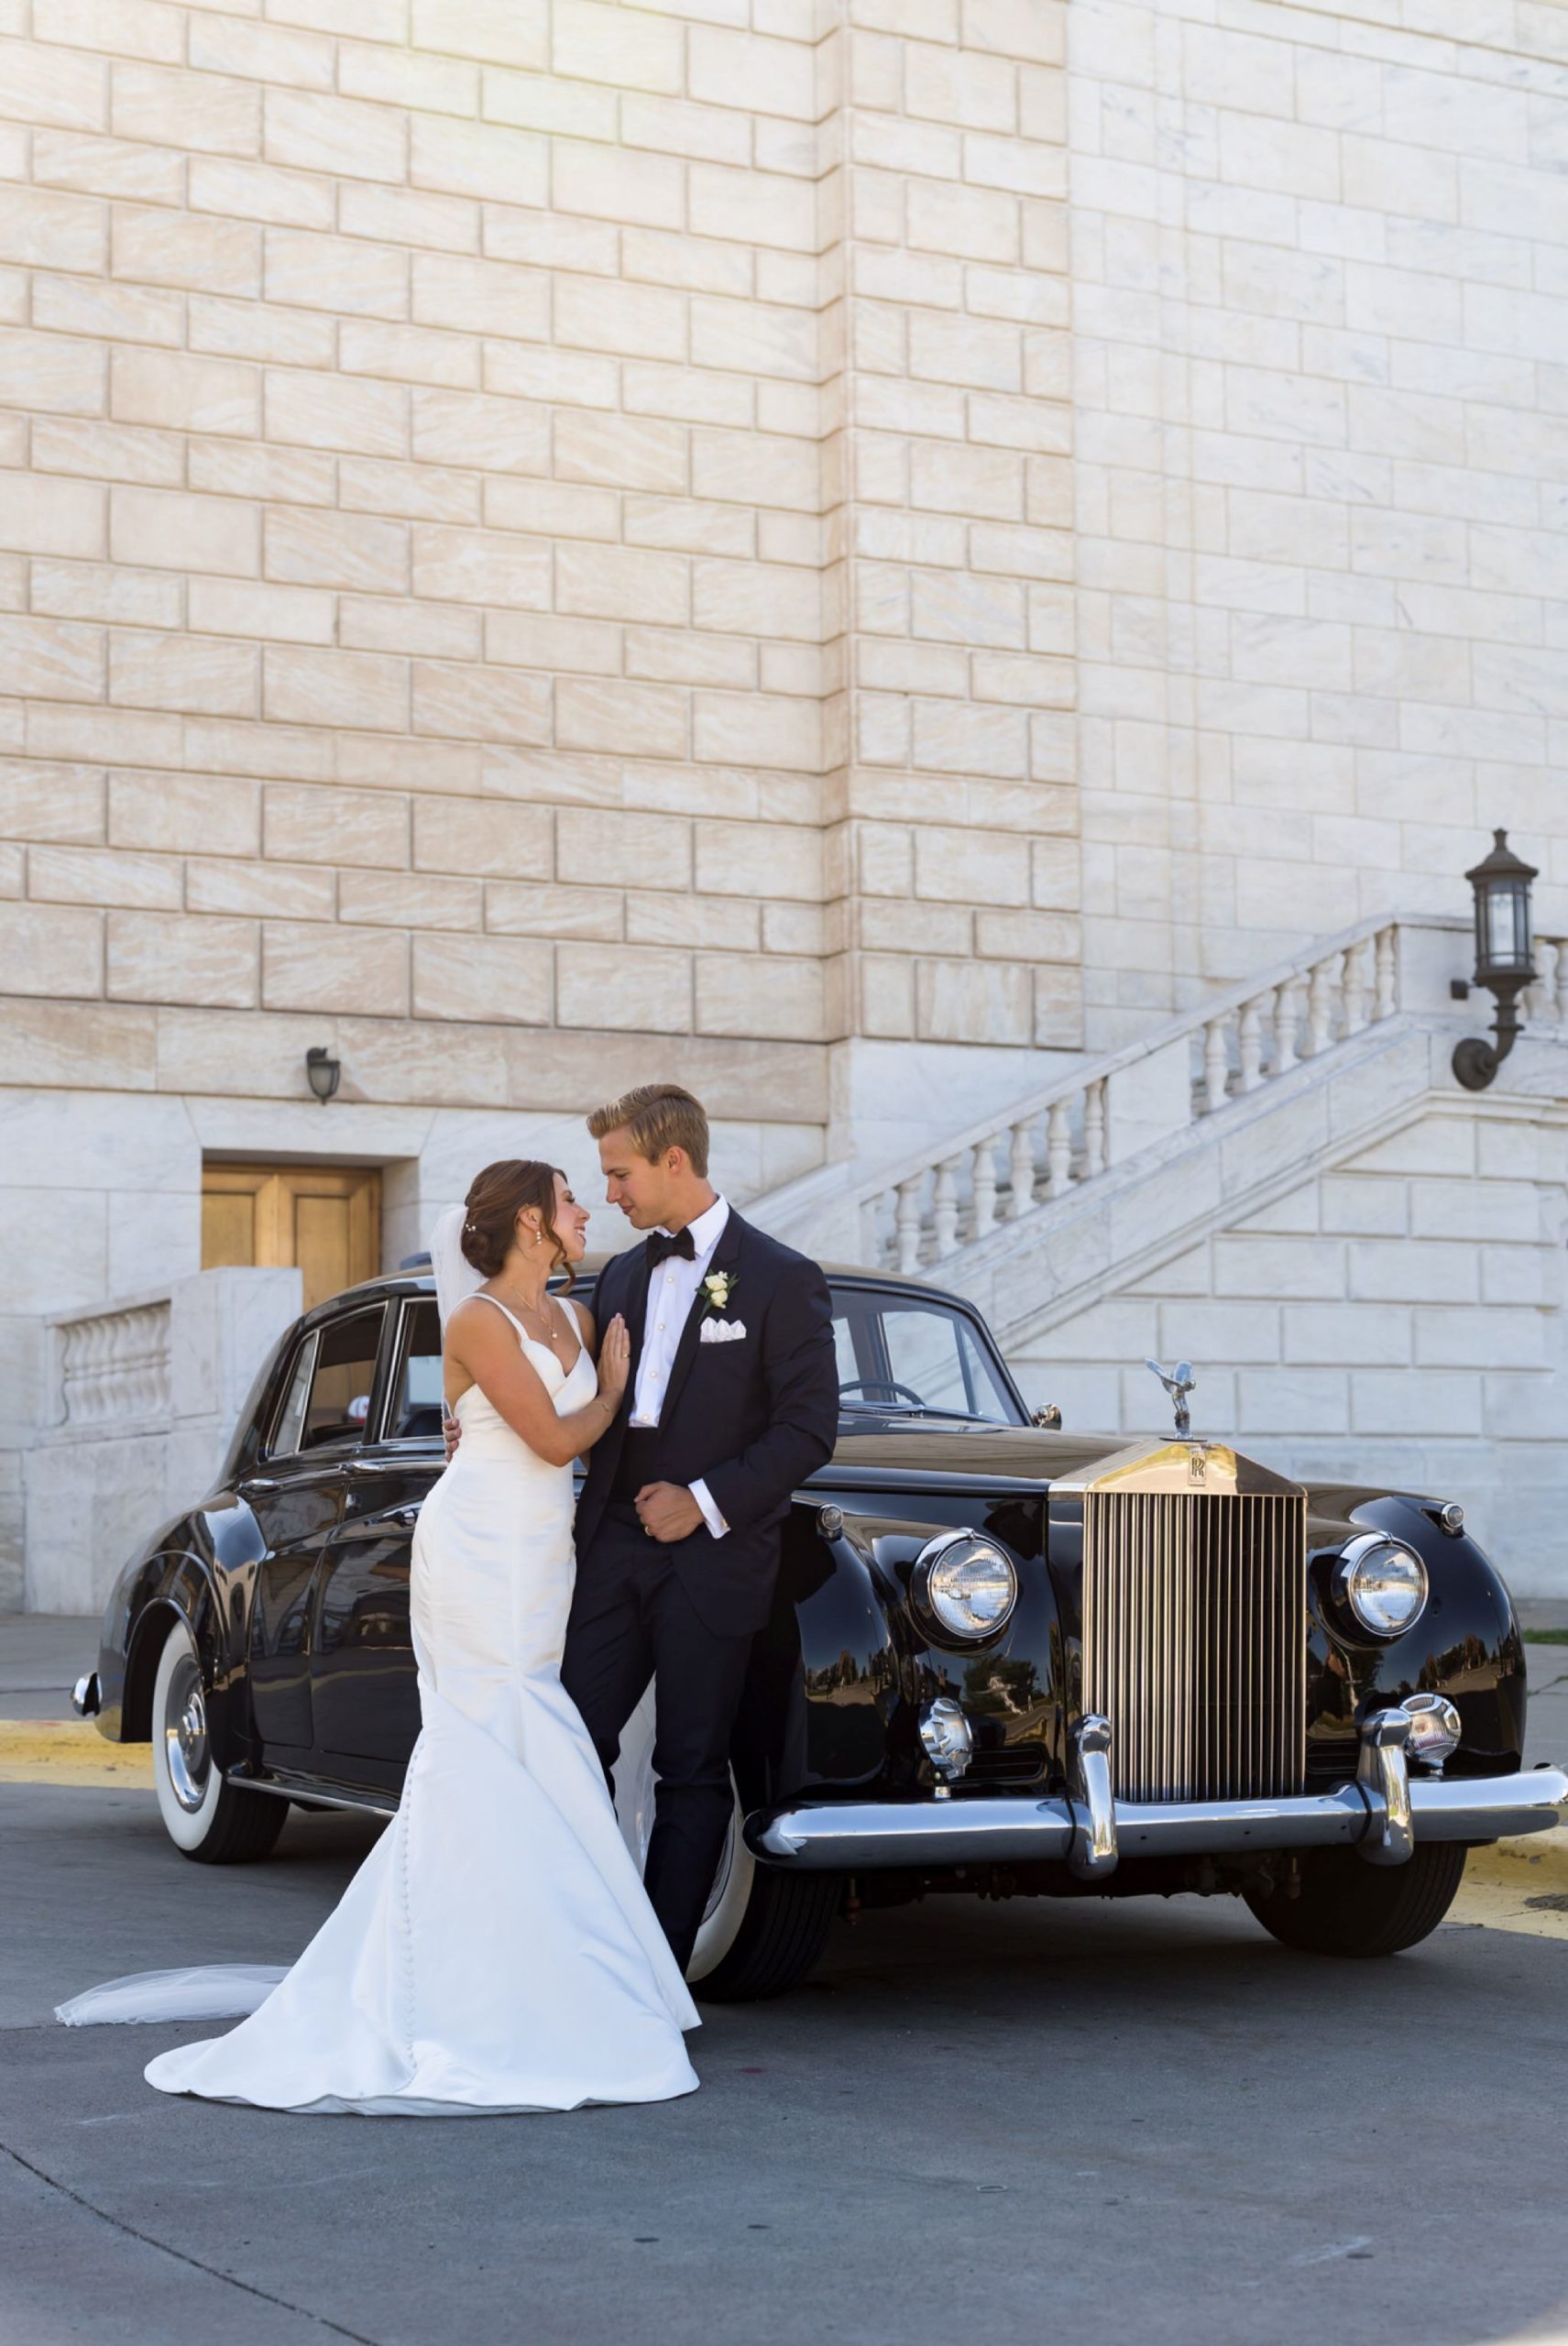 A groom relaxes against a black Rolls Royce with one hand in his pocket.  